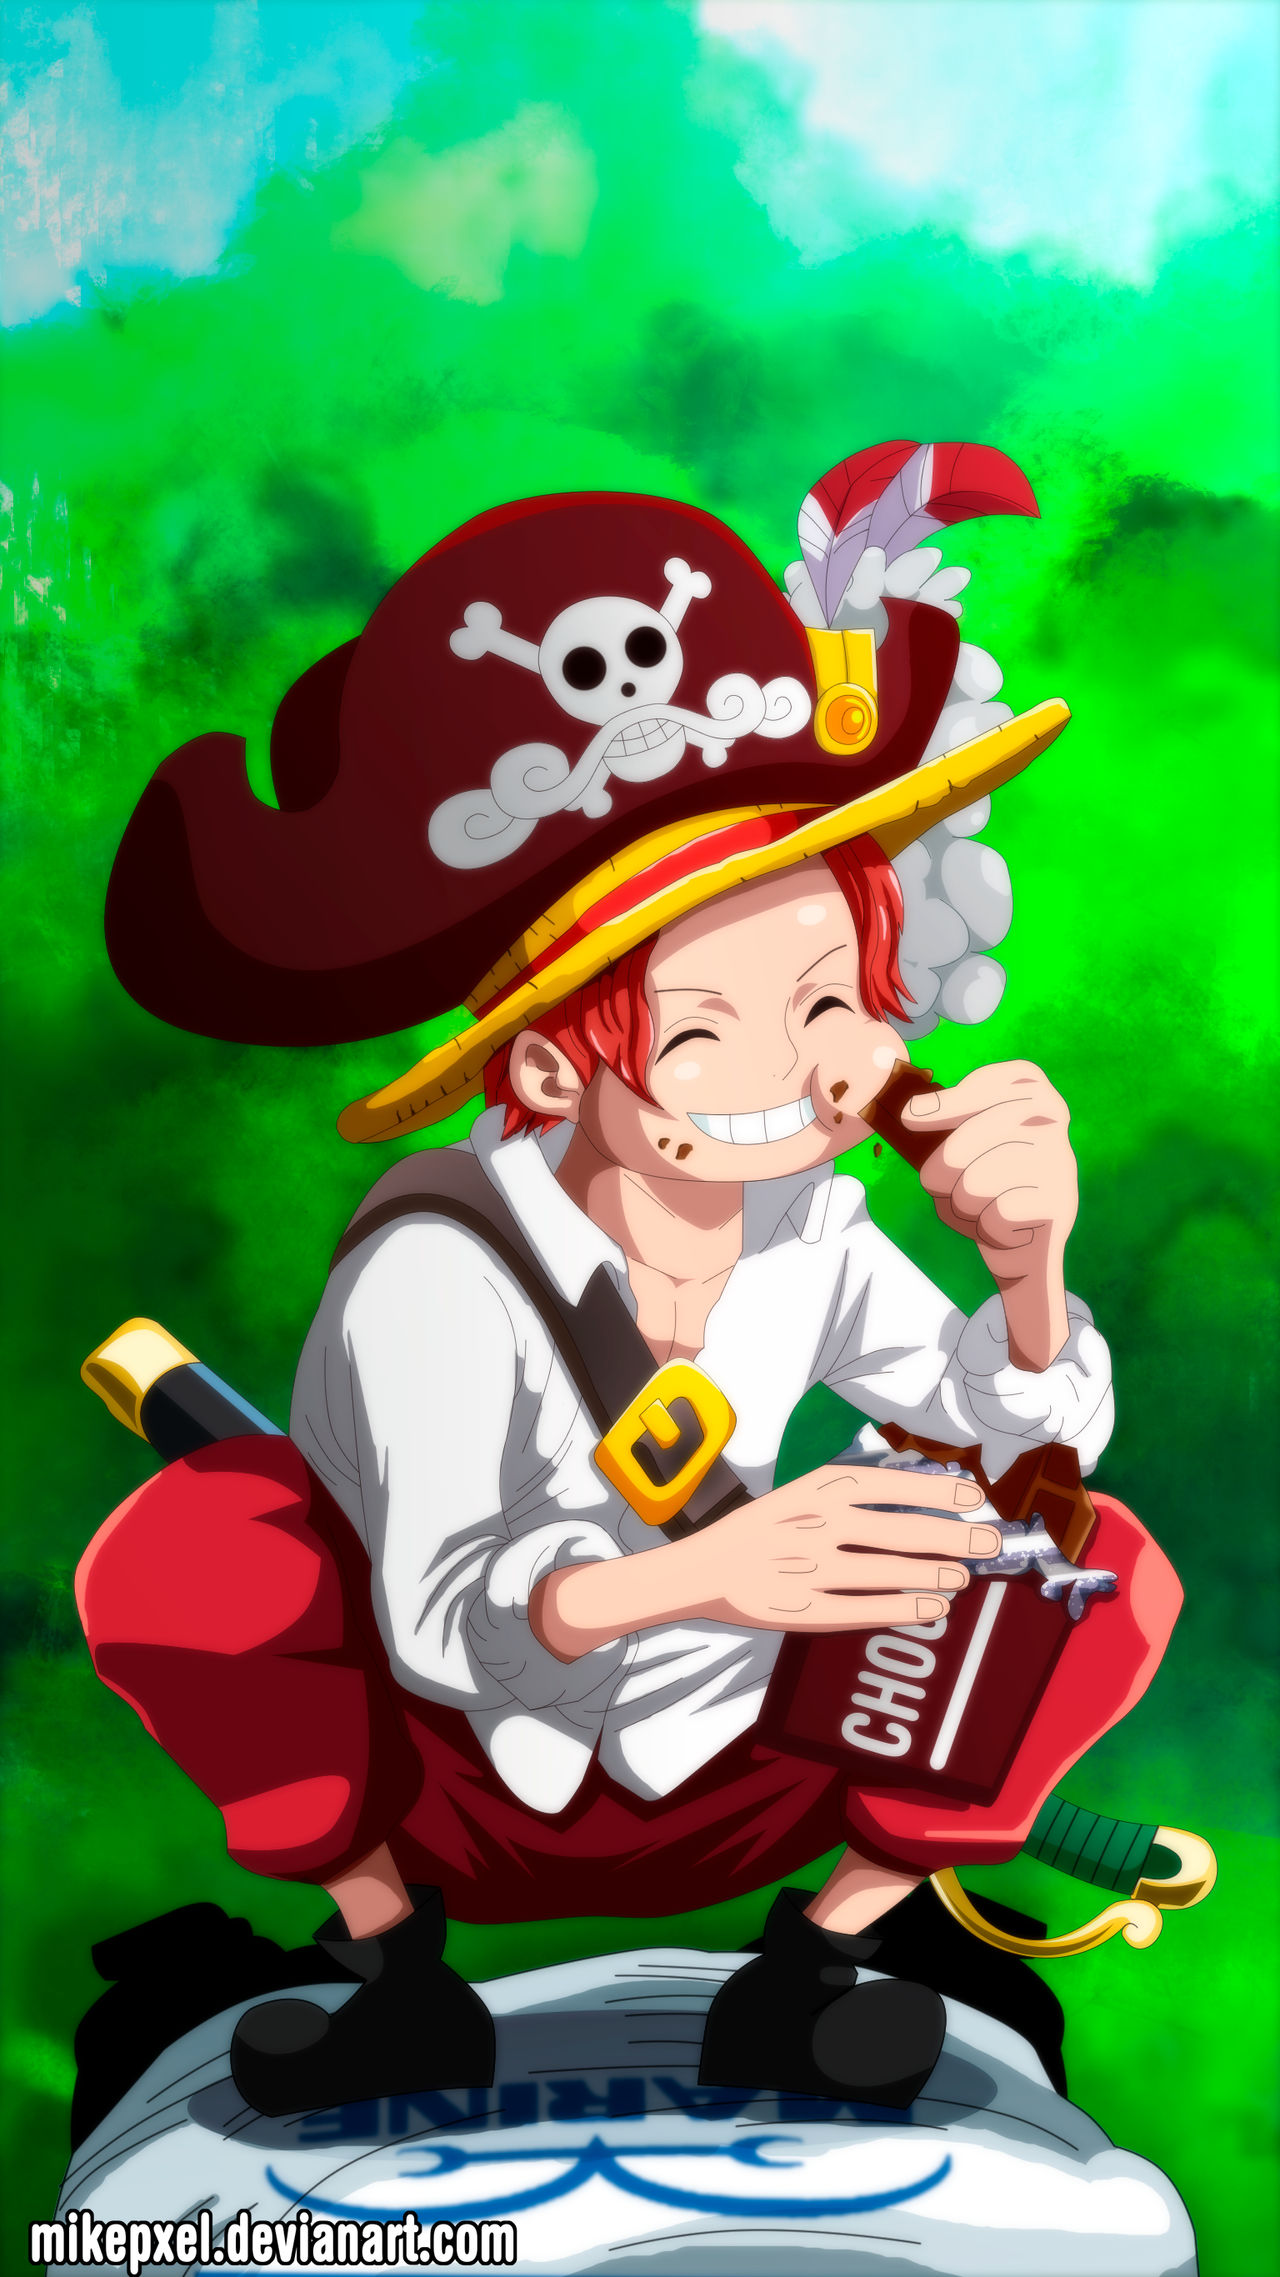 Shanks Kid Chapter 965 By Mikepxel On Deviantart